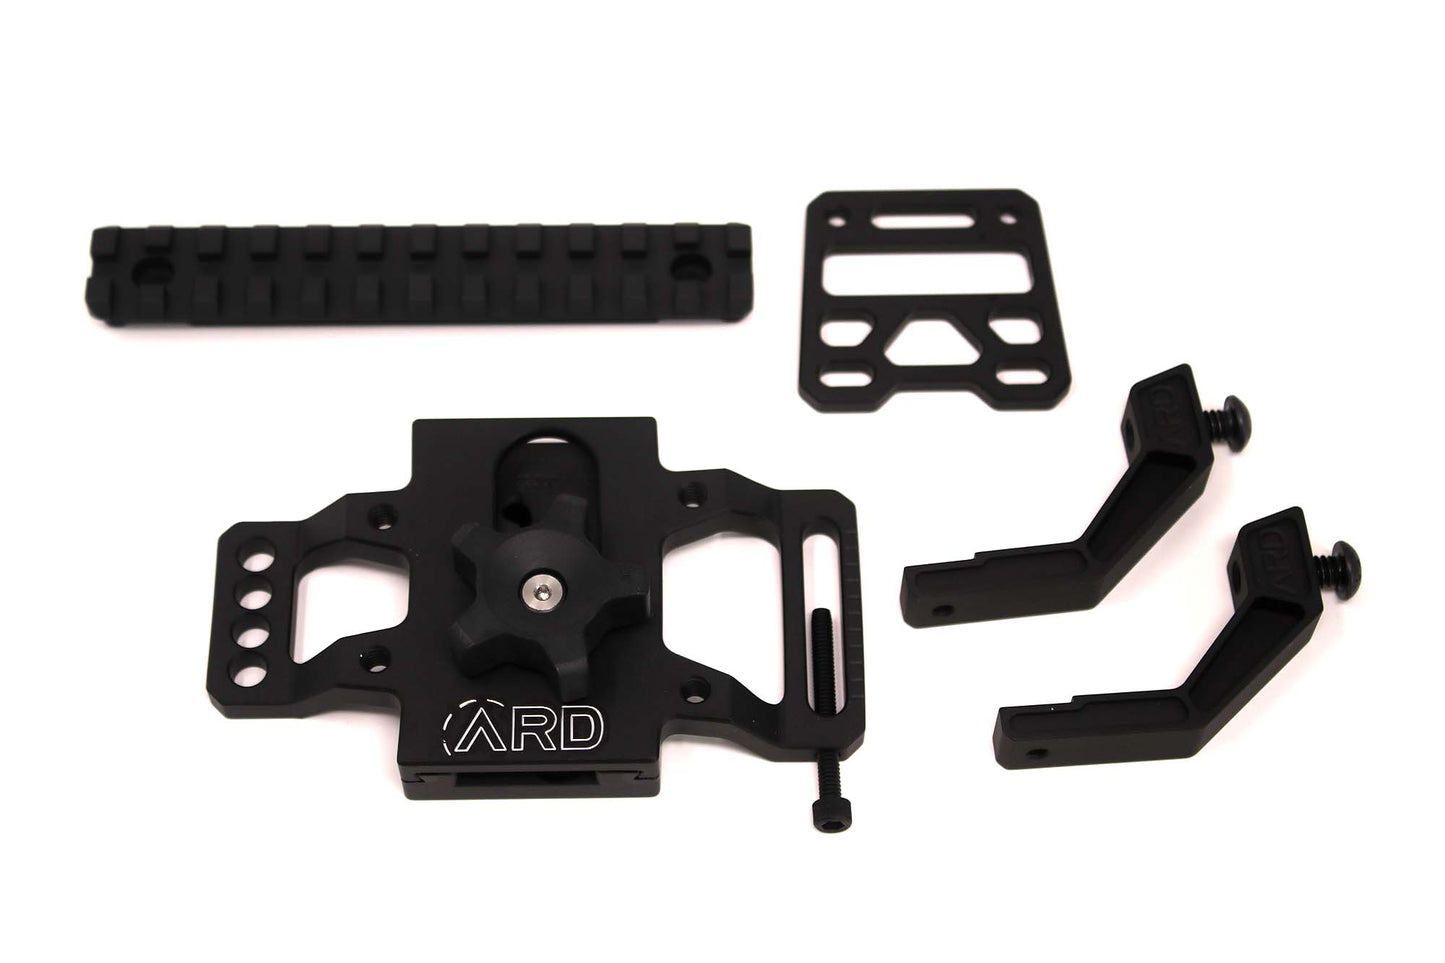 ARD Rail Package with adjustable mount.